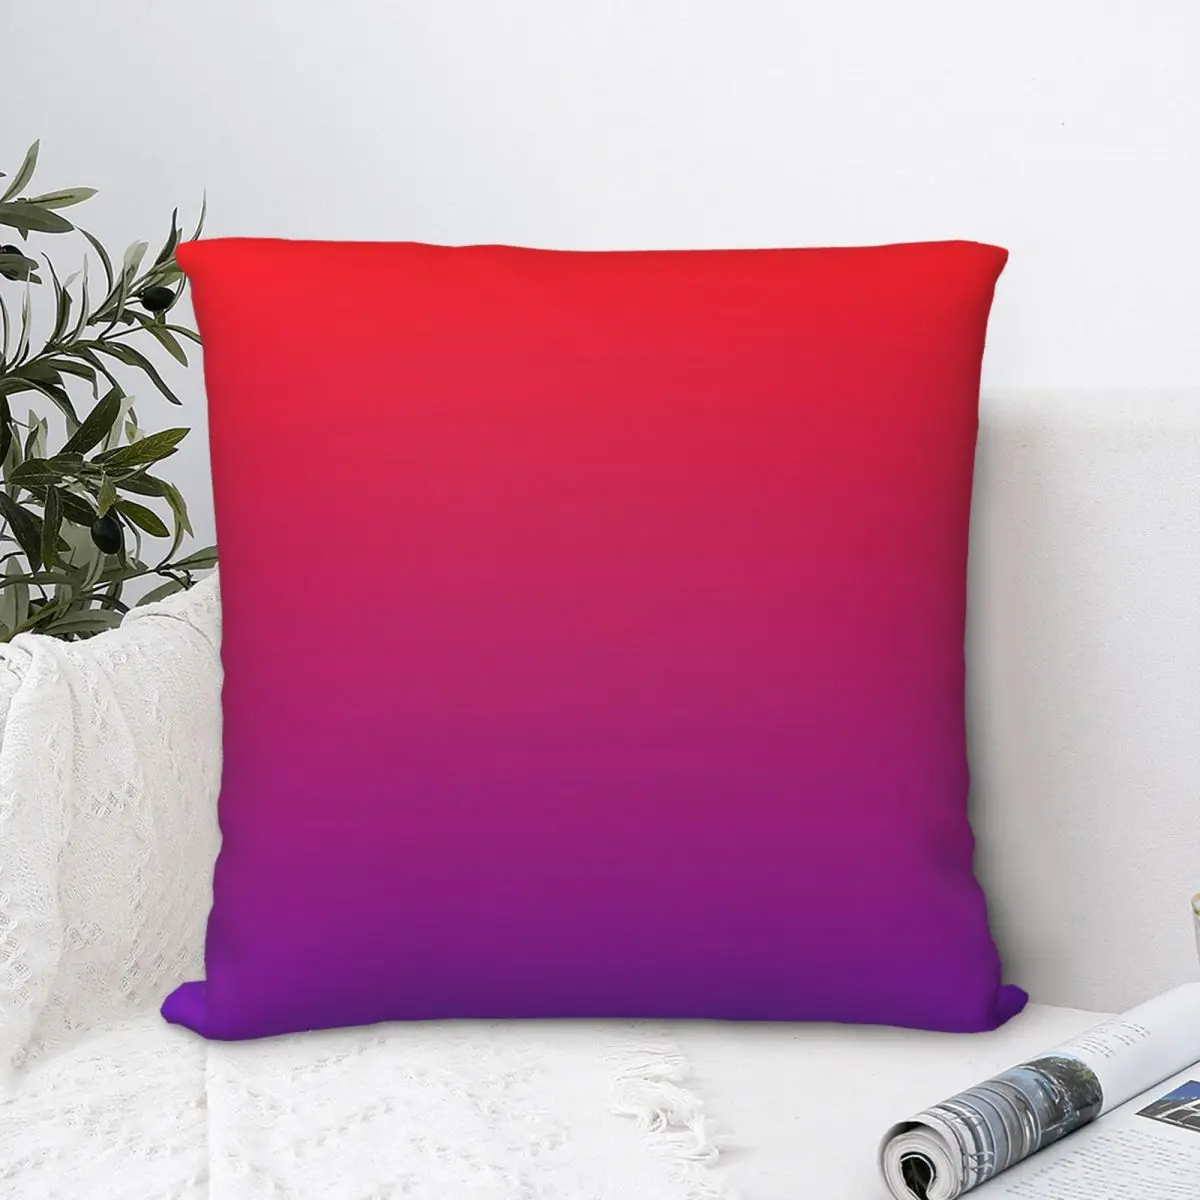 NEON LIGHTS Minimalist Red To Purple Gradient Ombre Hug Pillowcase Gradient Colorful Backpack Cushion DIY Printed Coussin Covers